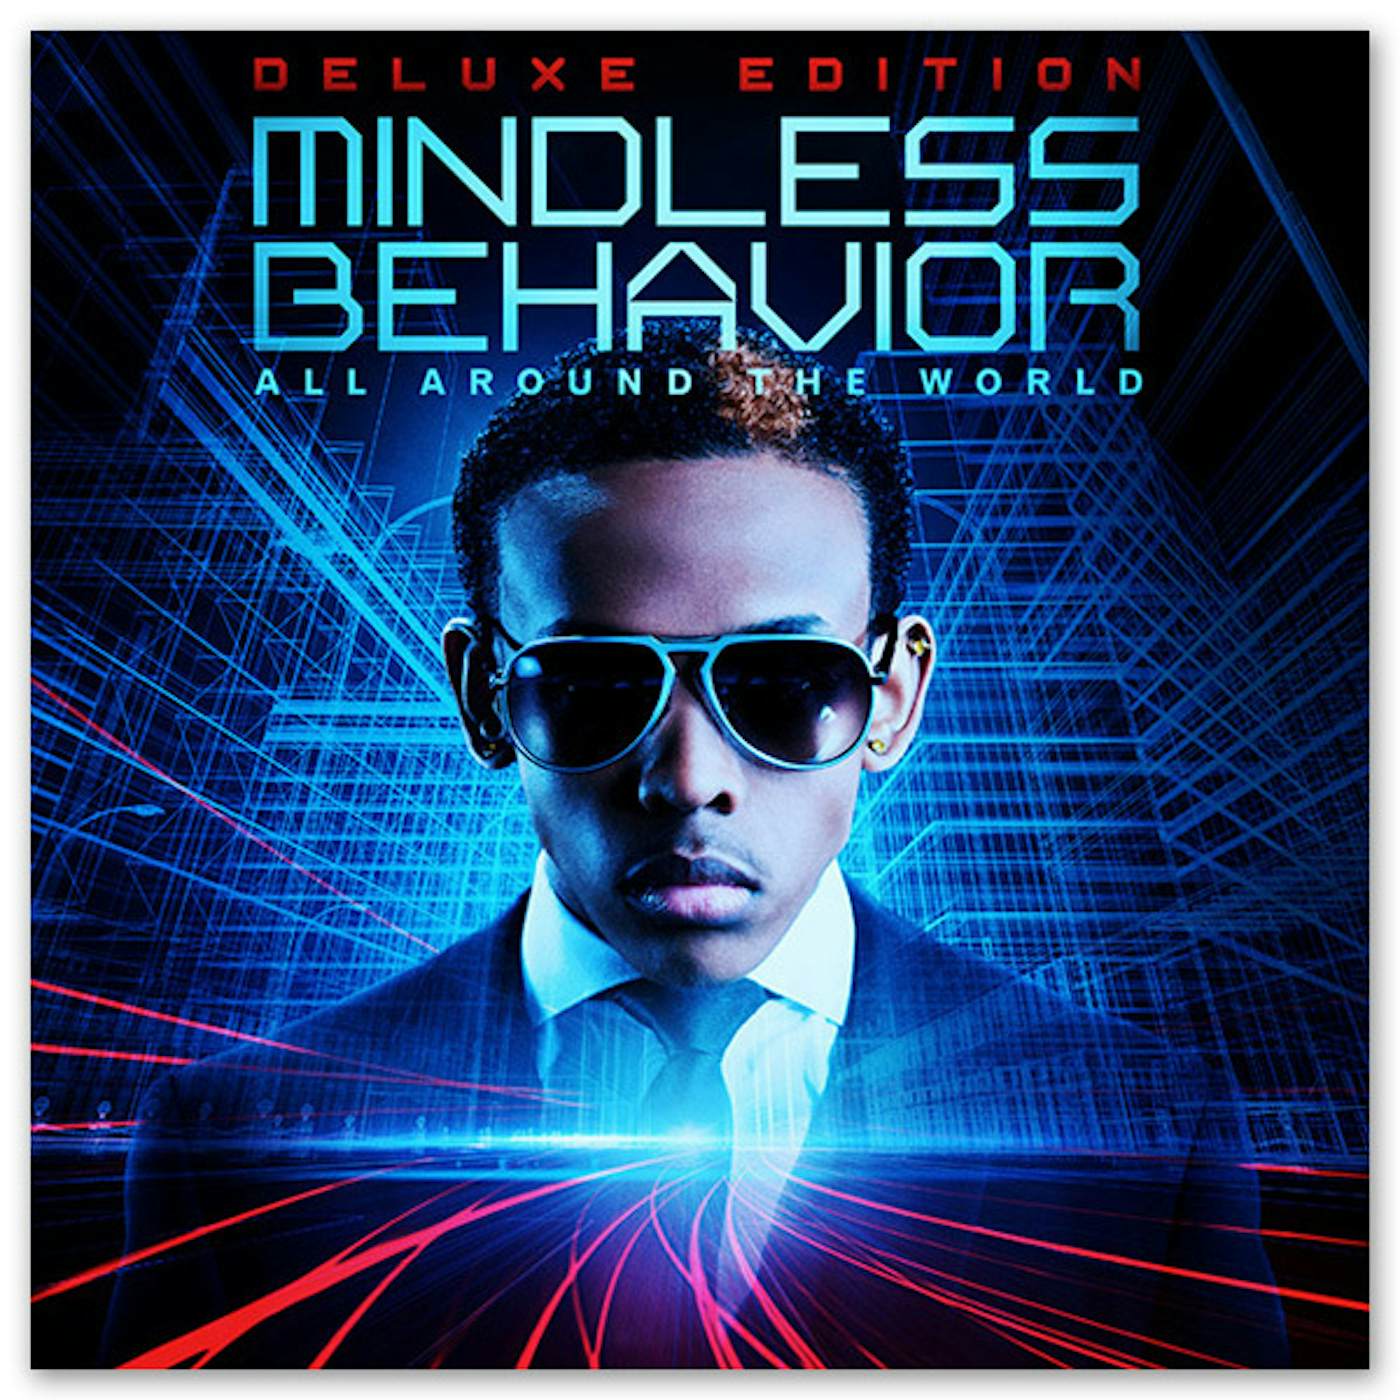 Mindless Behavior - Deluxe All Around The World CD - Prodigy